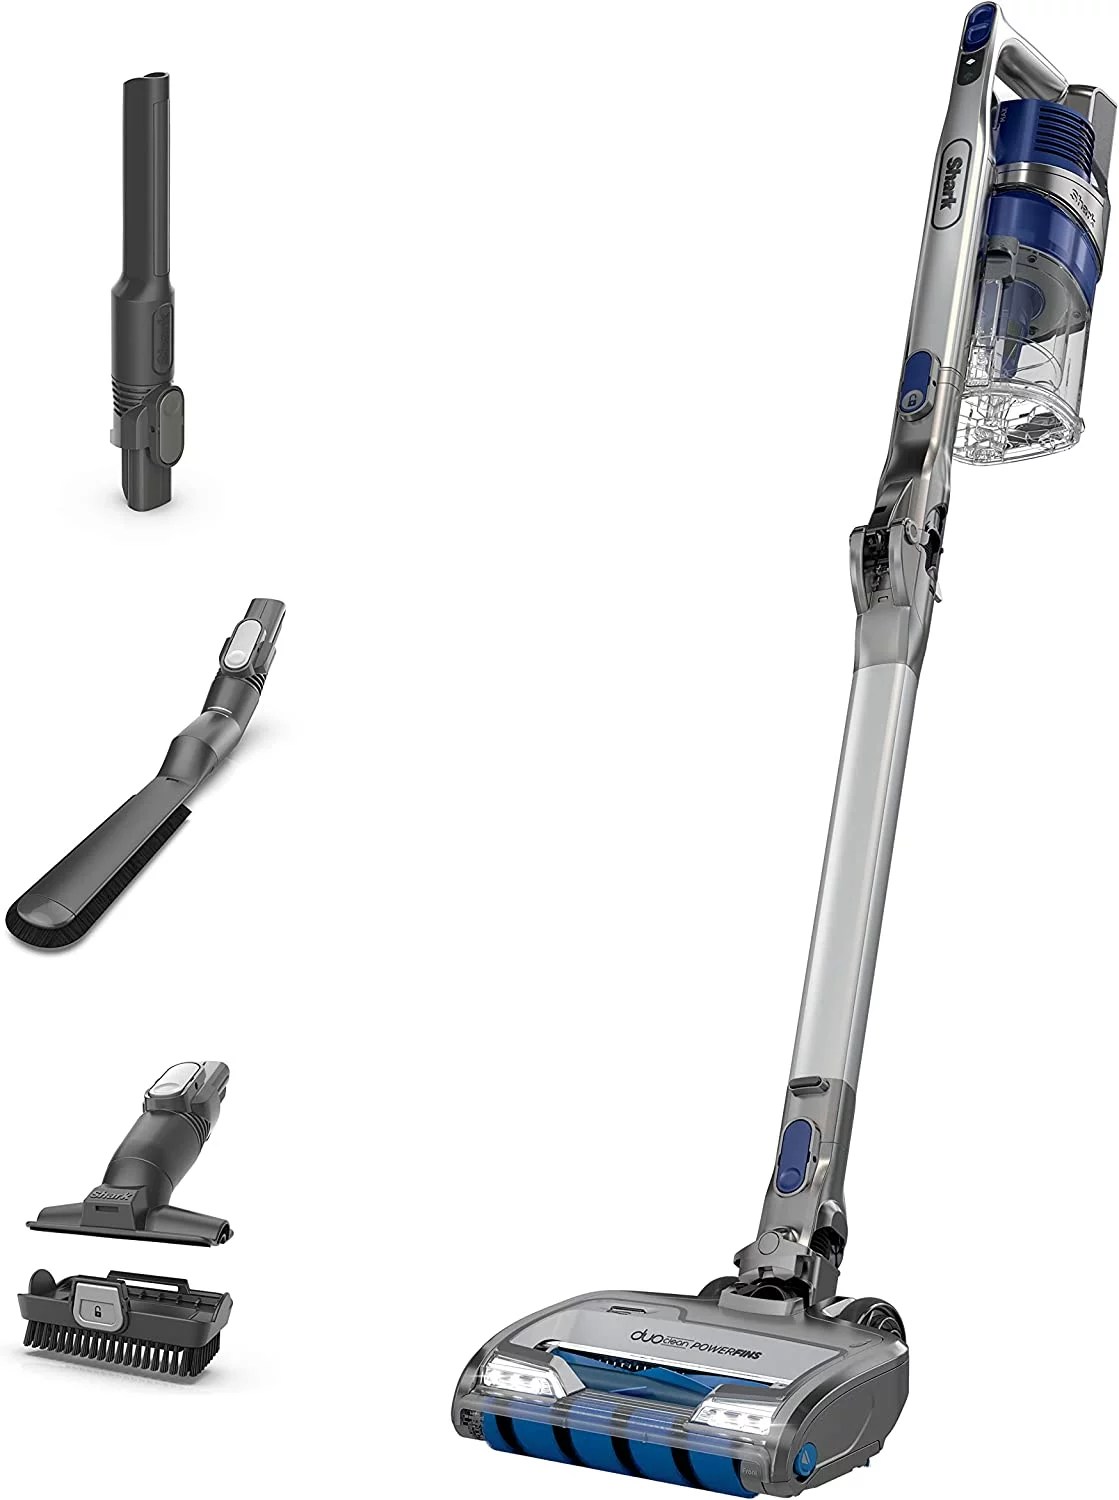 shark cordless vacuum with other attachments on a white background